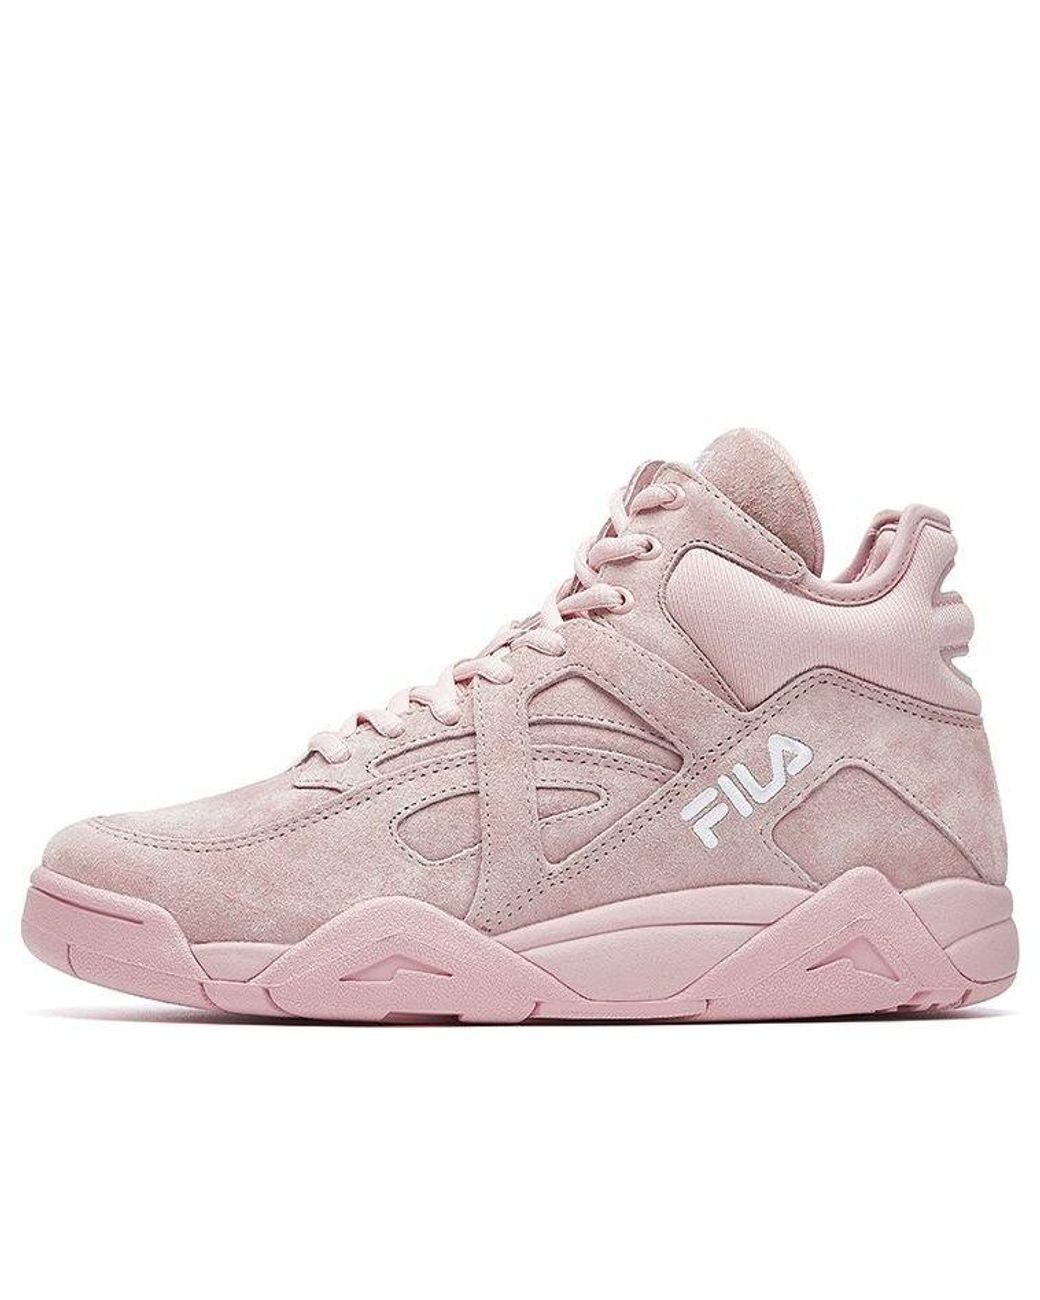 Fila Cage Retro Basketball Shoes Pink | Lyst